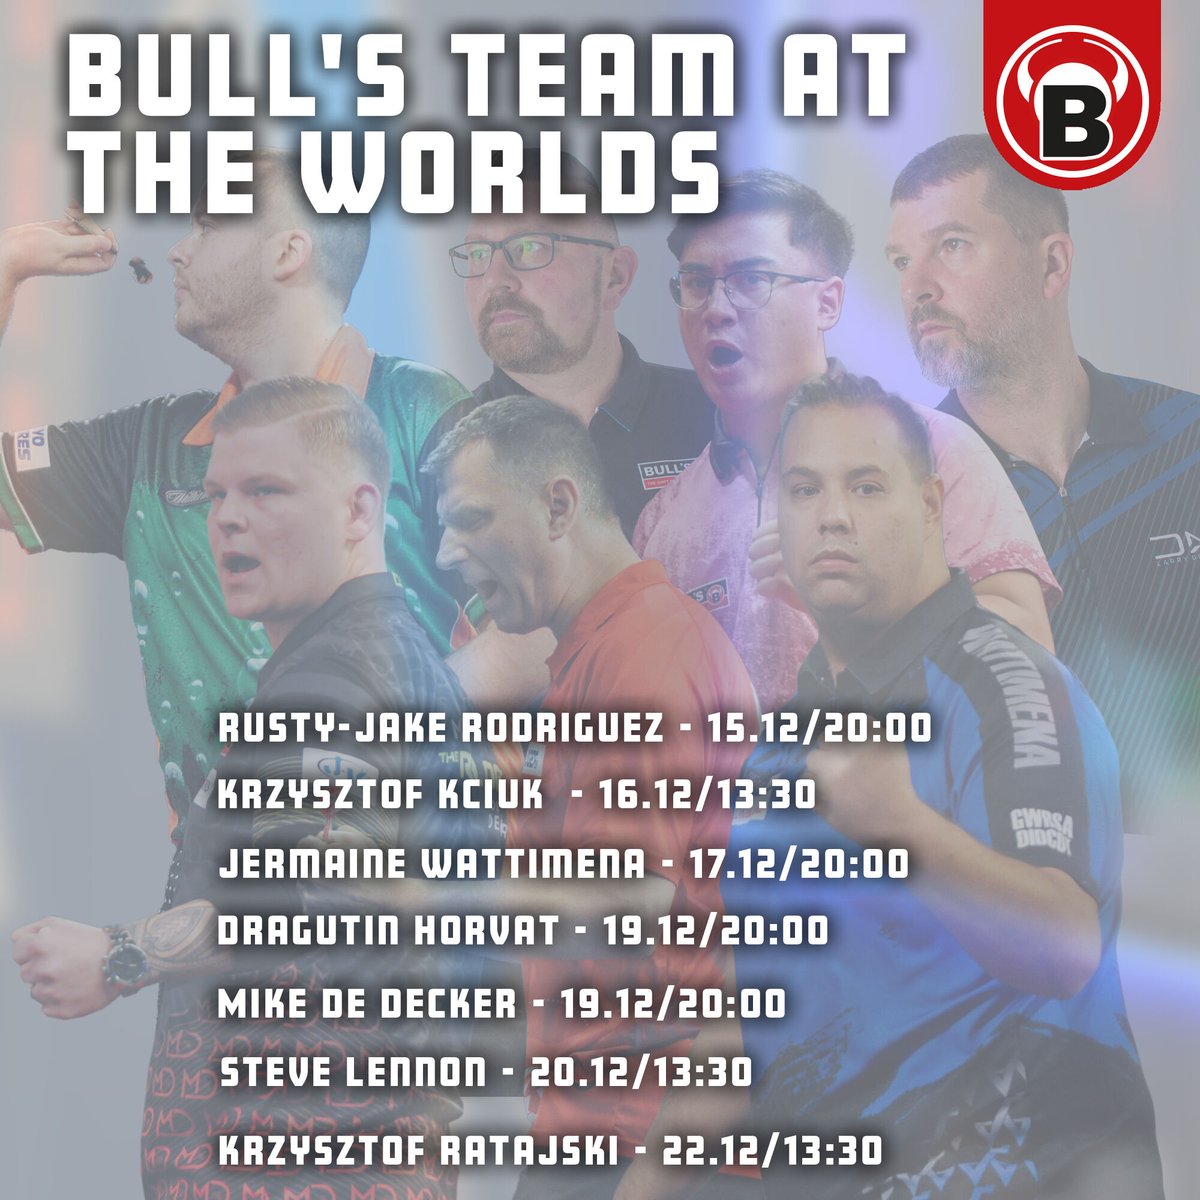 Just 10 Days to go🎉 🔥 We are proud of our #bullsteam. They have given us many unforgettable moments this year and we are delighted that many of our team members qualified for the worlds. We are keeping our fingers crossed.🤞 #BullsDarts #dartswm